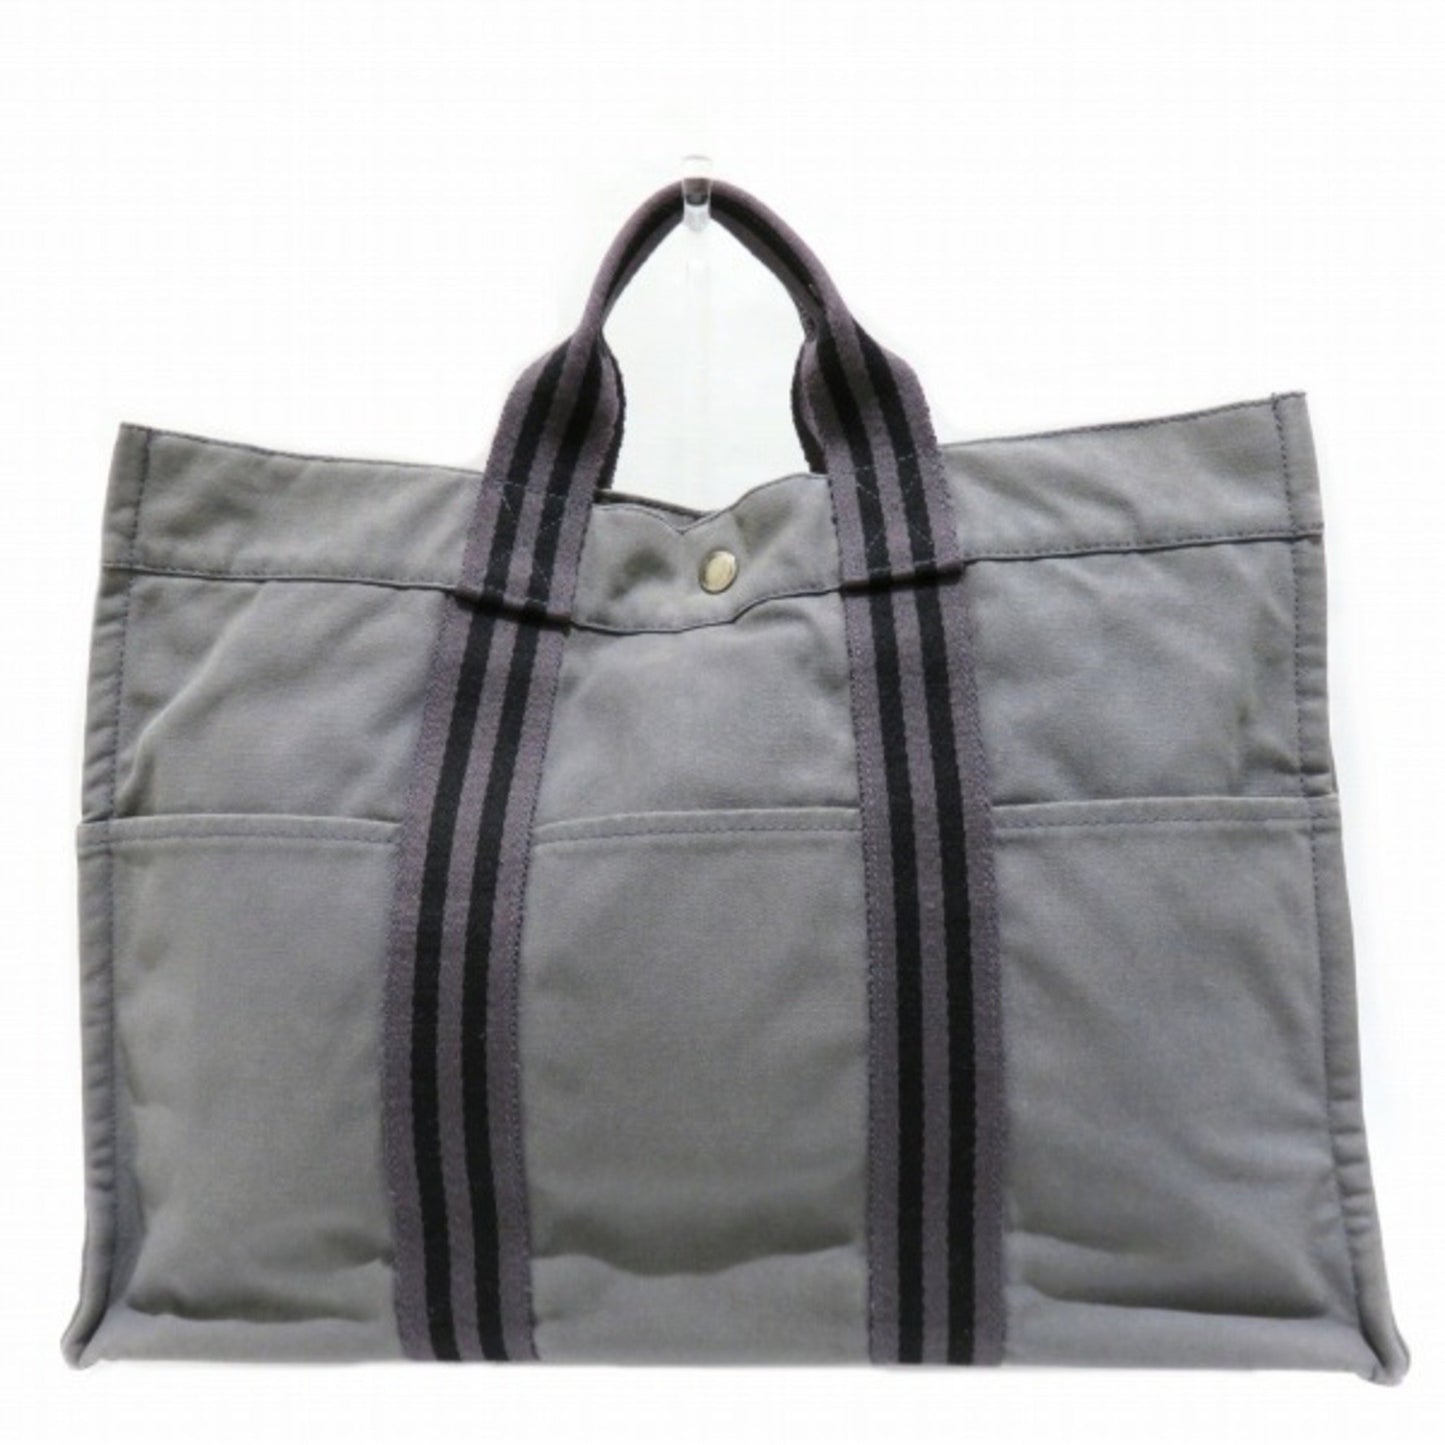 Hermes Unisex Canvas Handbag with Timeless Design and High-Quality Material in Grey